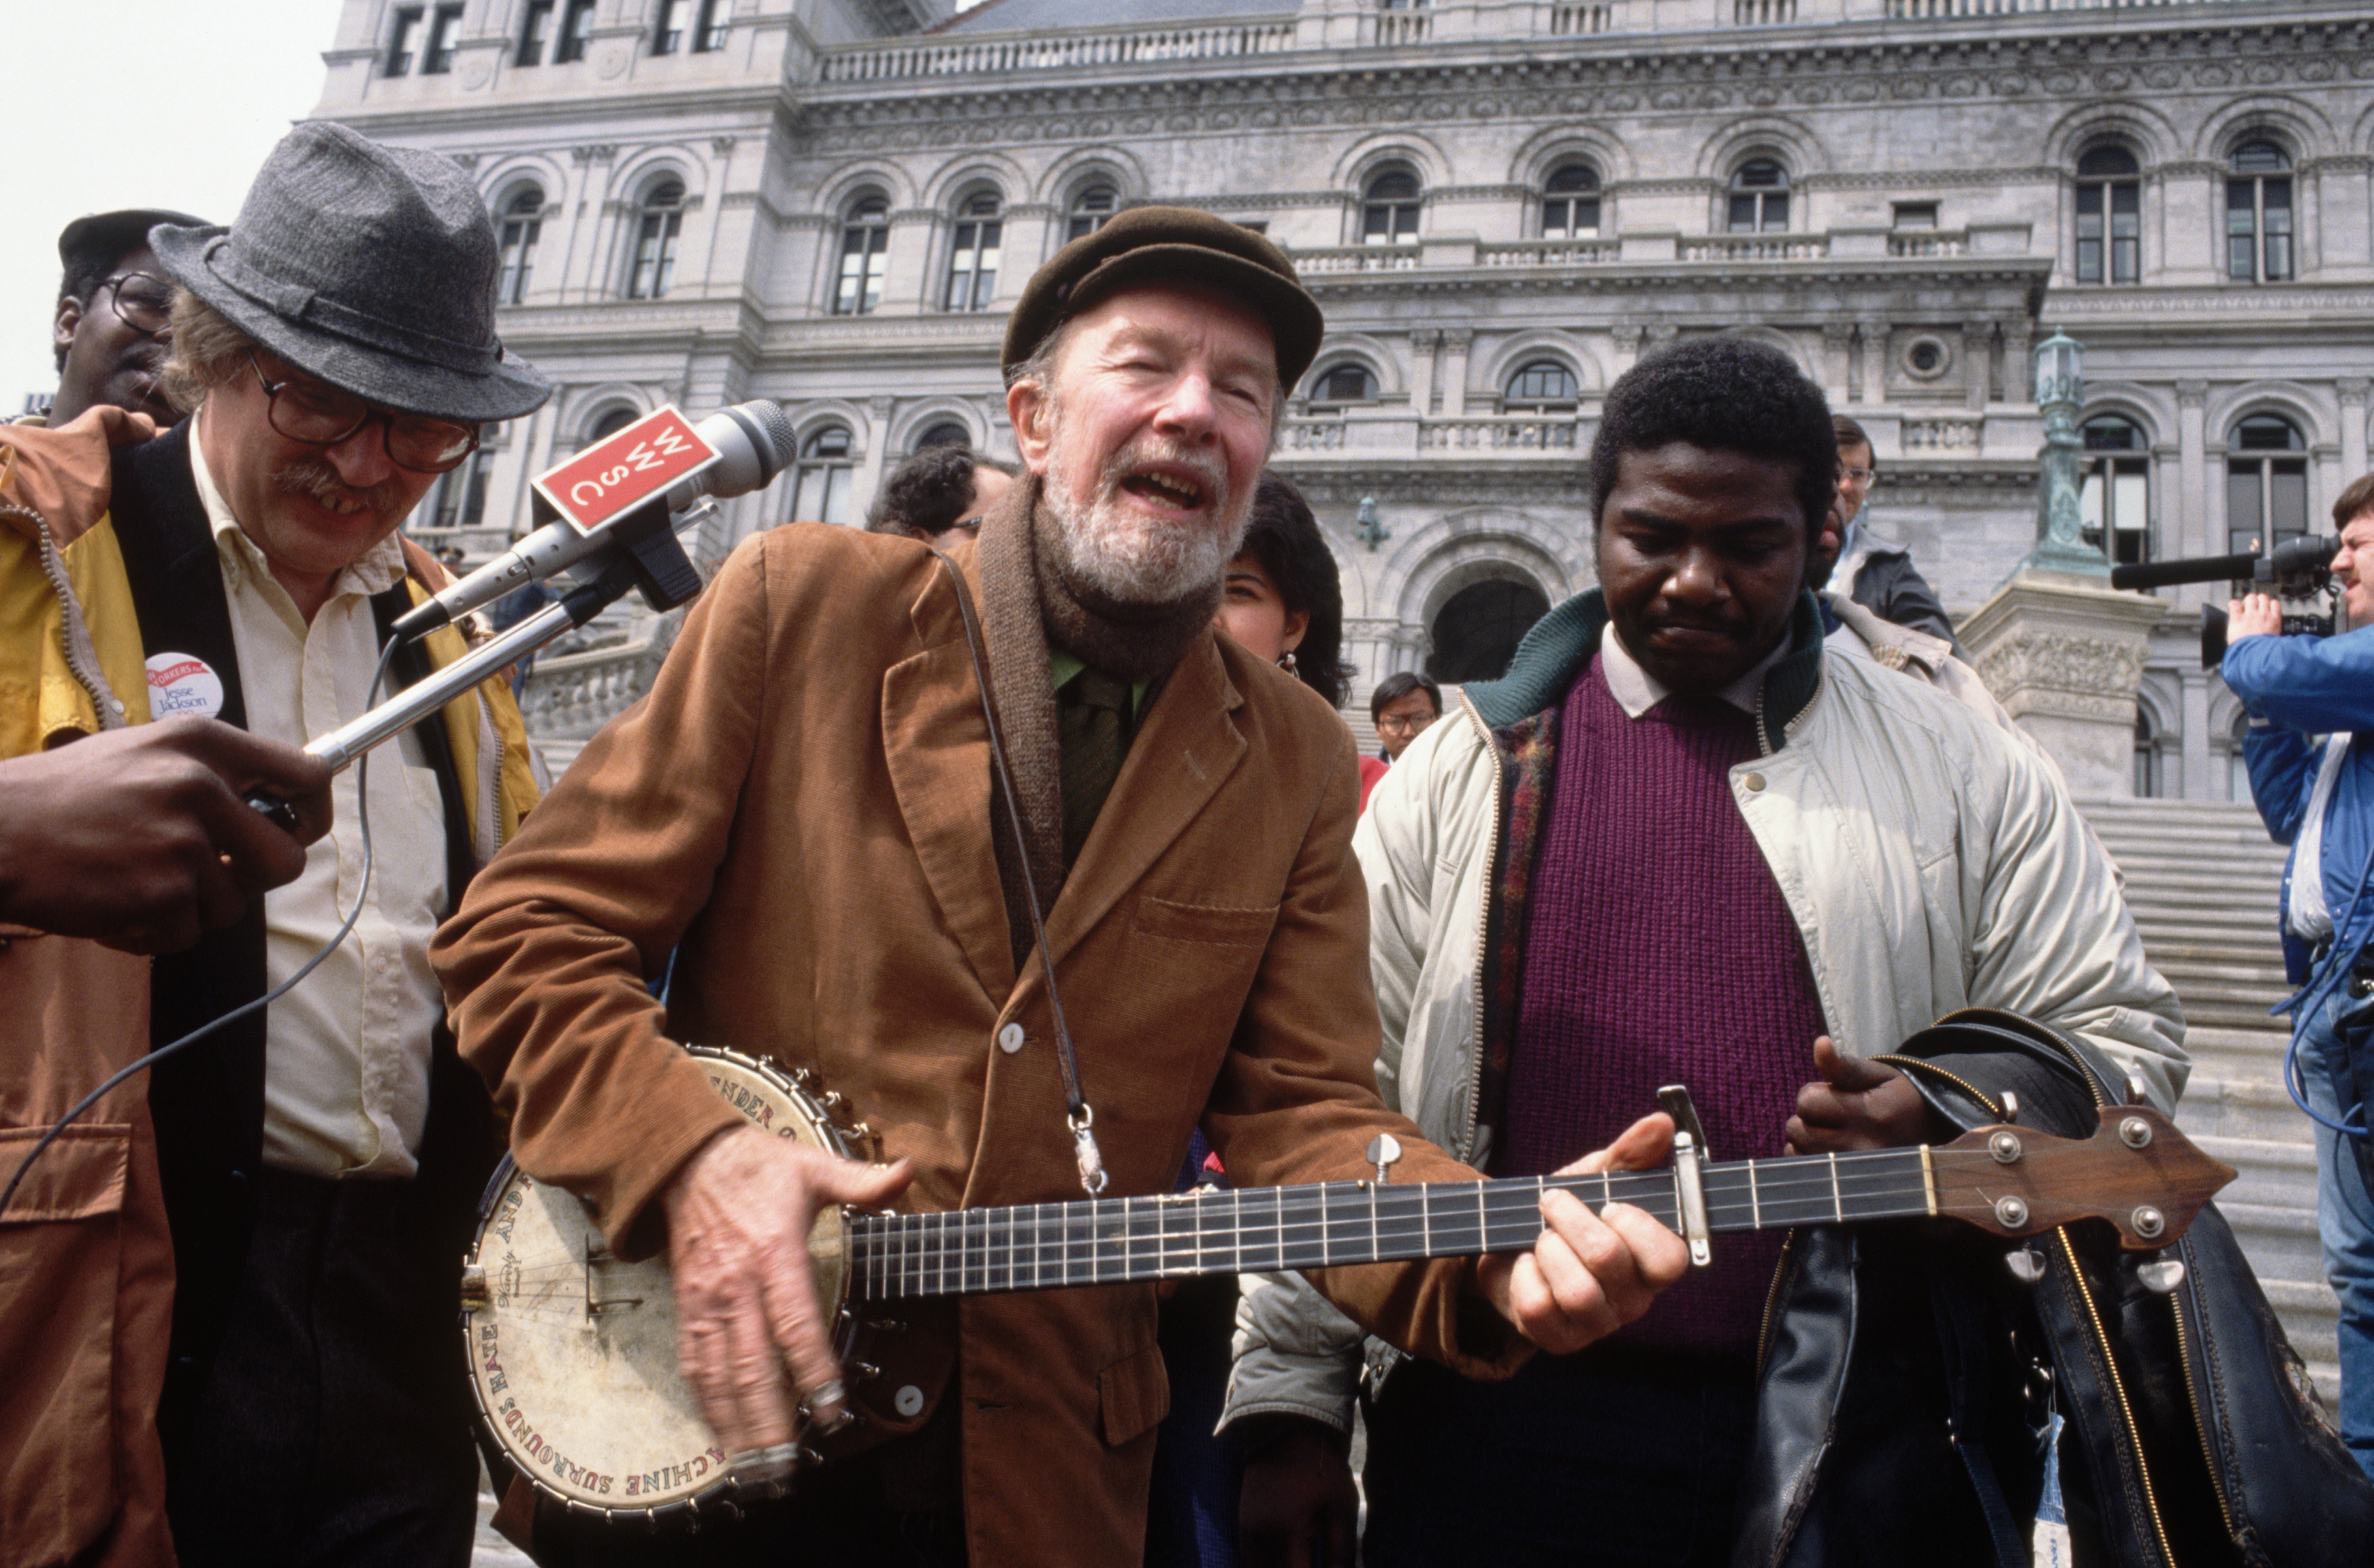 Massive Pete Seeger Box Set Featuring 20 Unreleased Recordings Coming This Spring